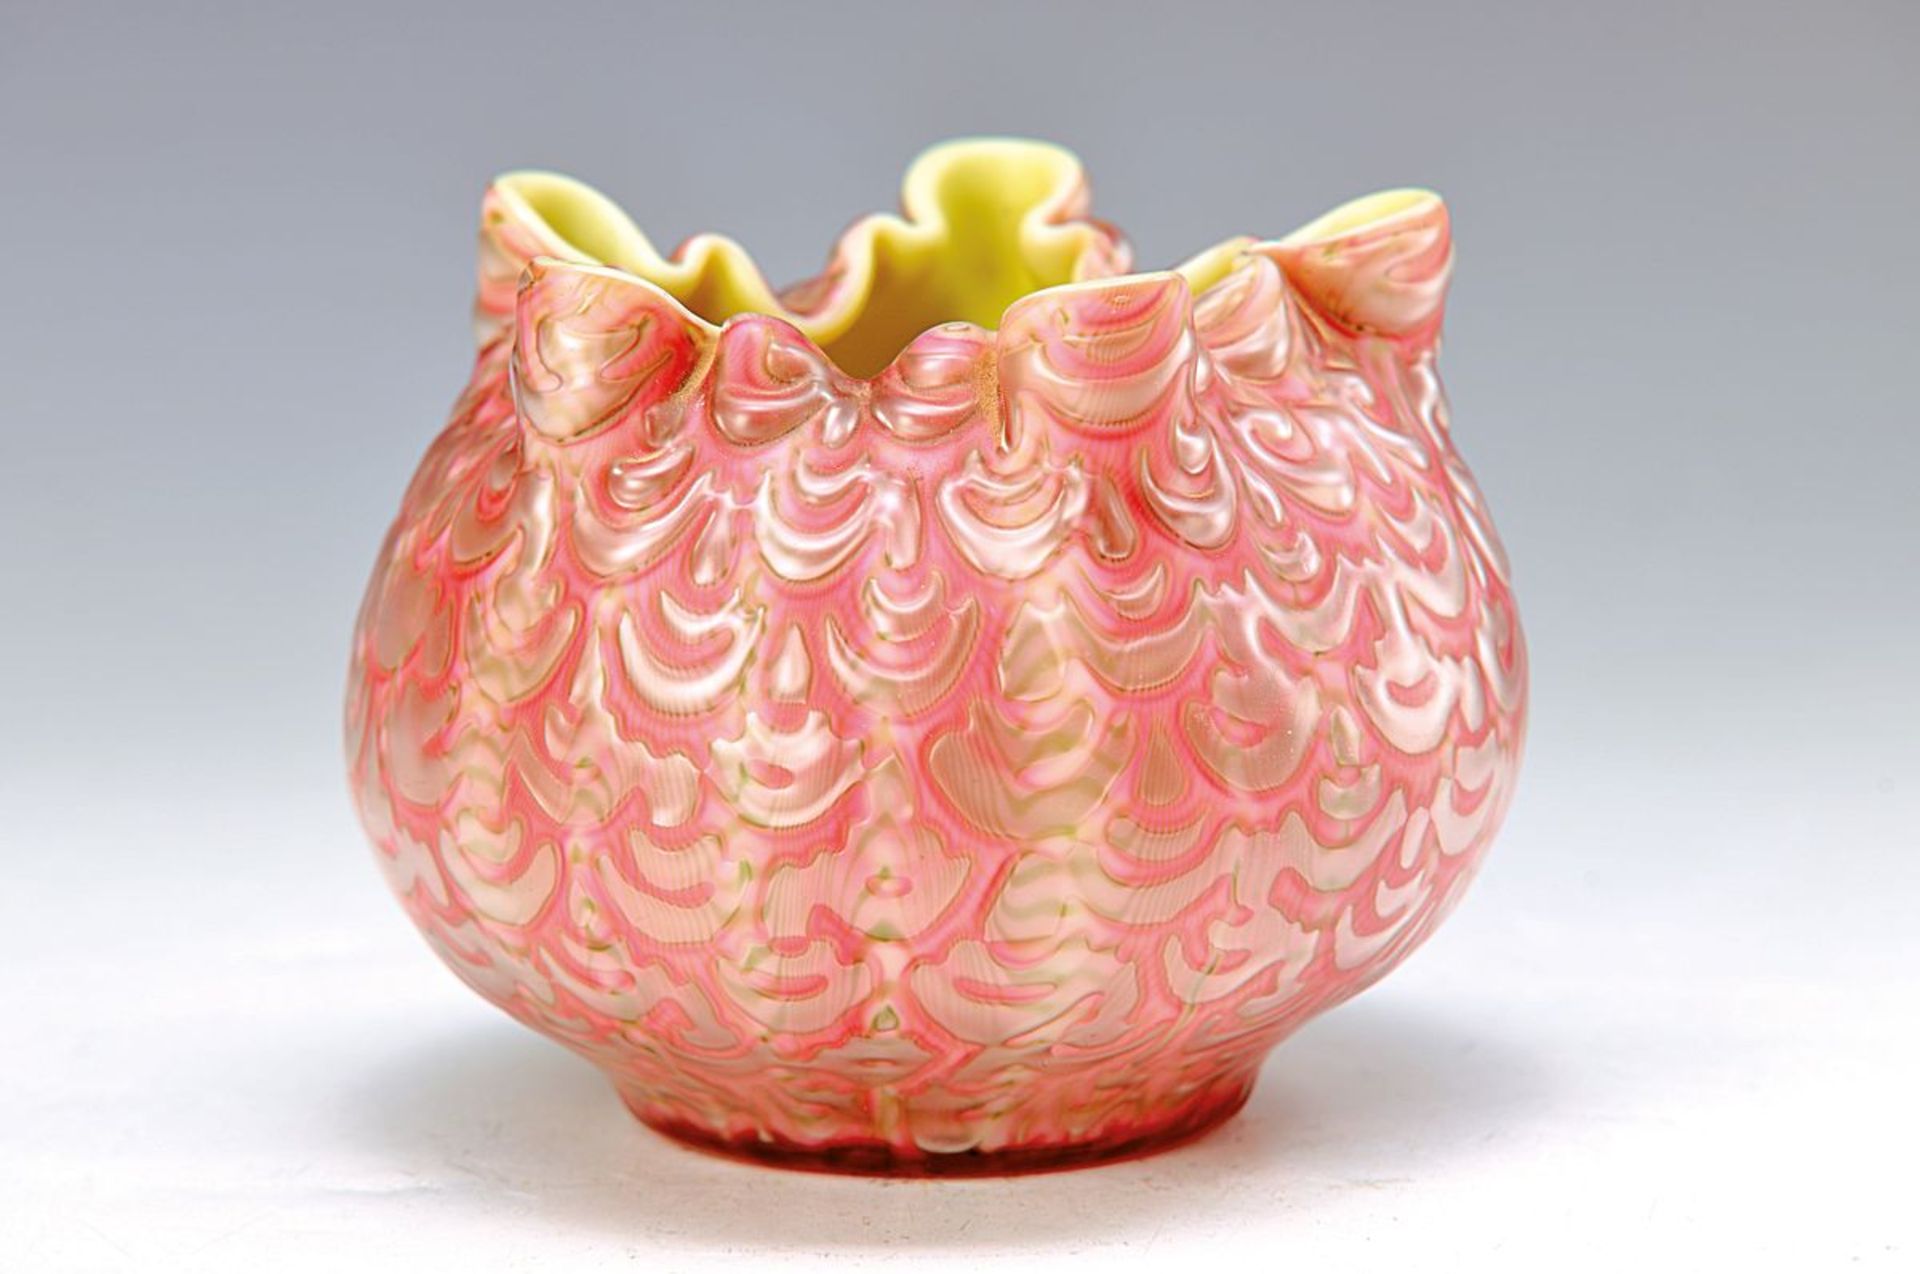 vase, Austria, around 1905-10, opaque-yellow inside, rose overlay with melted waves, iridescent,